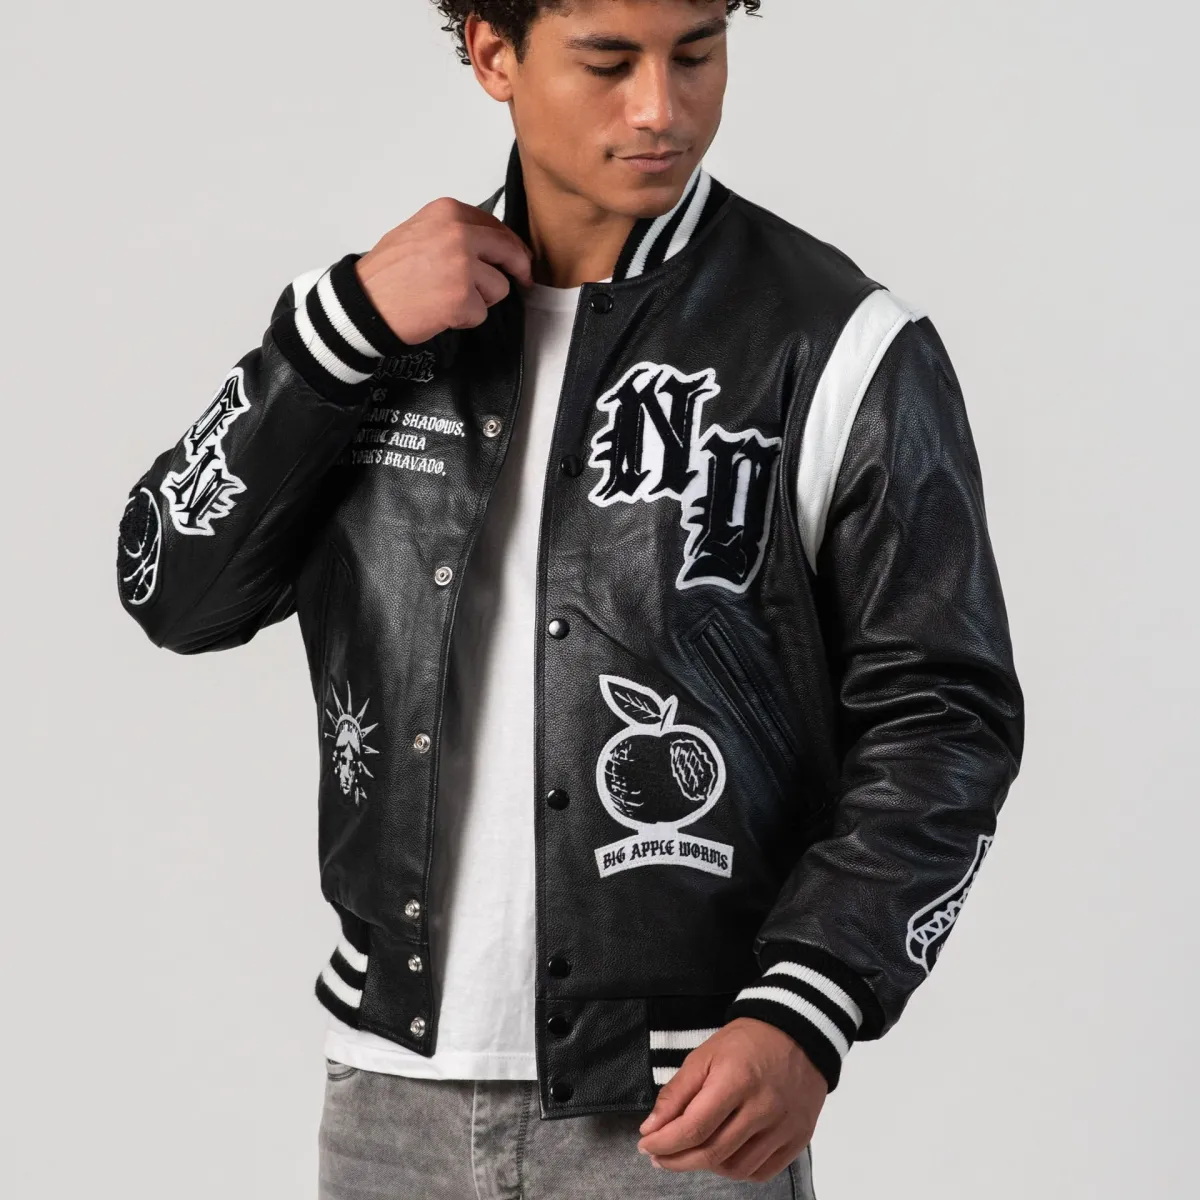 5 Uses Of Letterman Jacket Patches - Elegant Patches